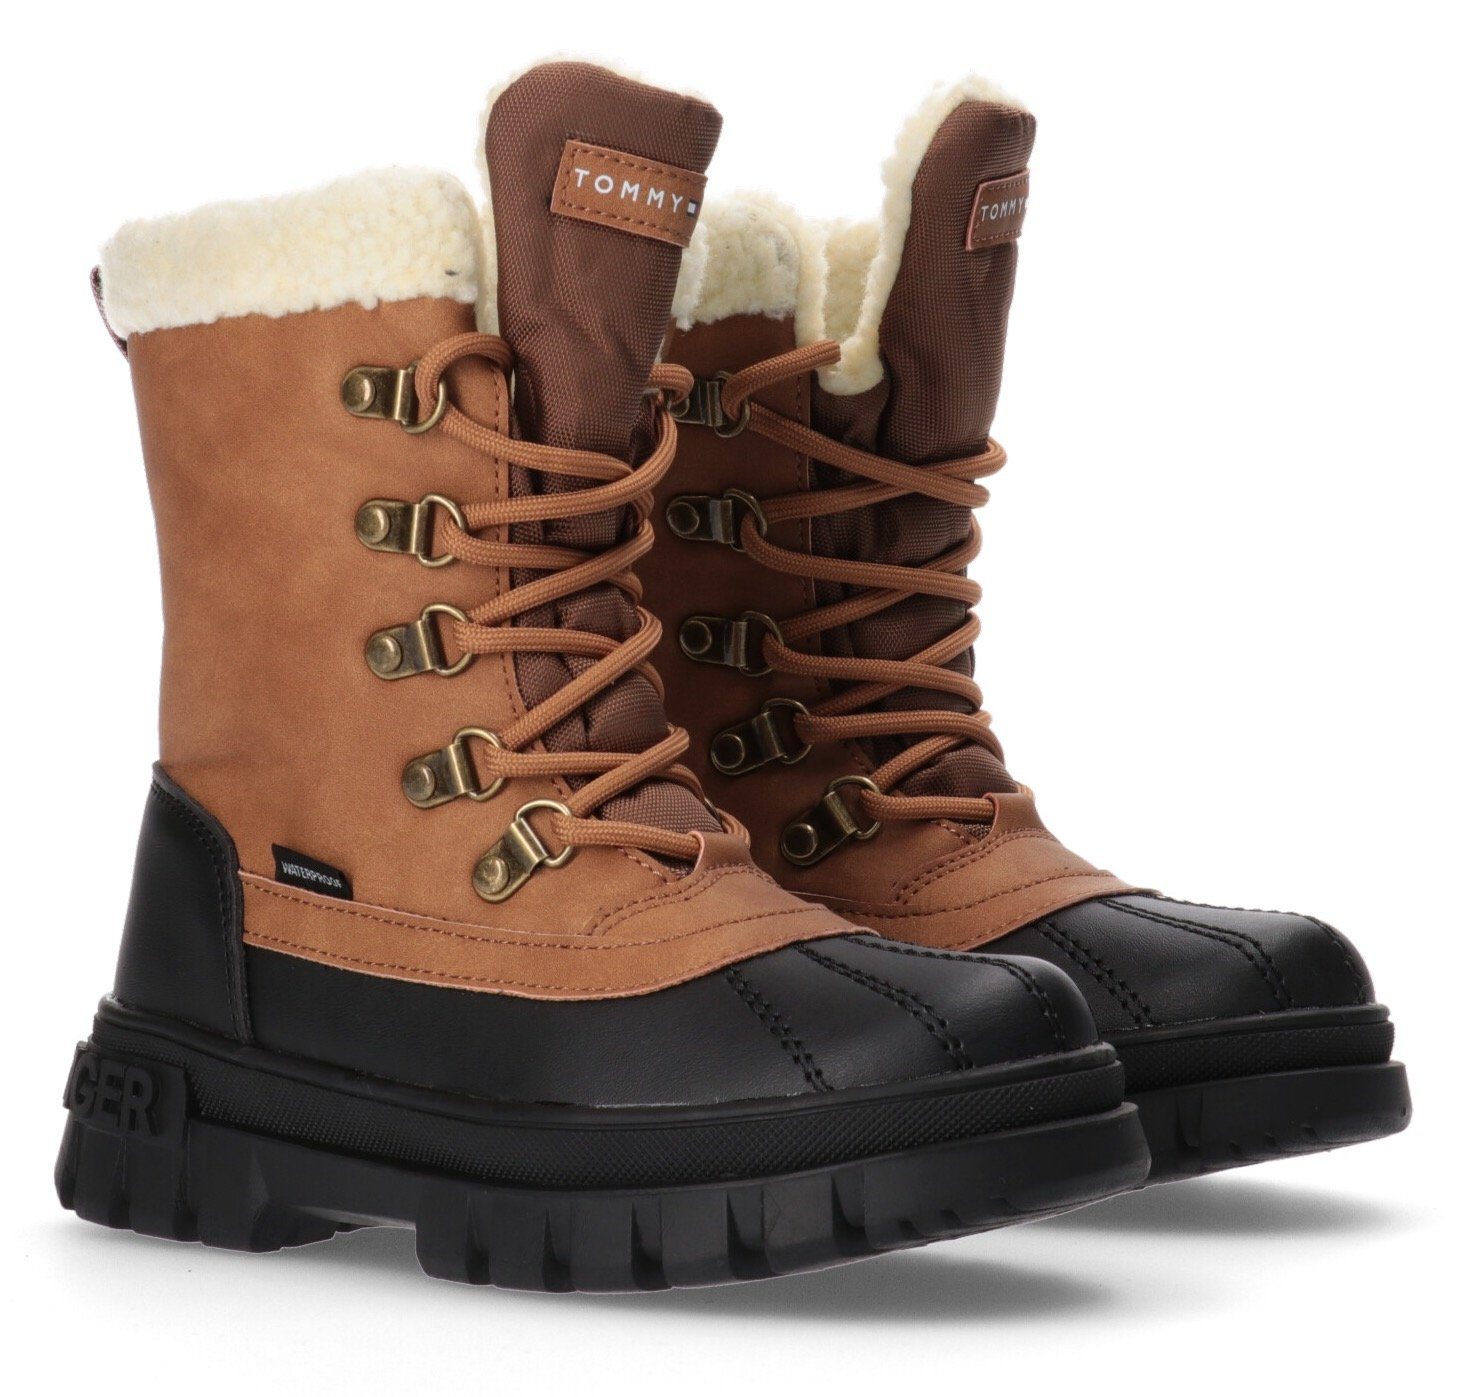 Tommy Thermostiefel Snowboots mit Hilfiger Warmfutter LACE-UP BOOT